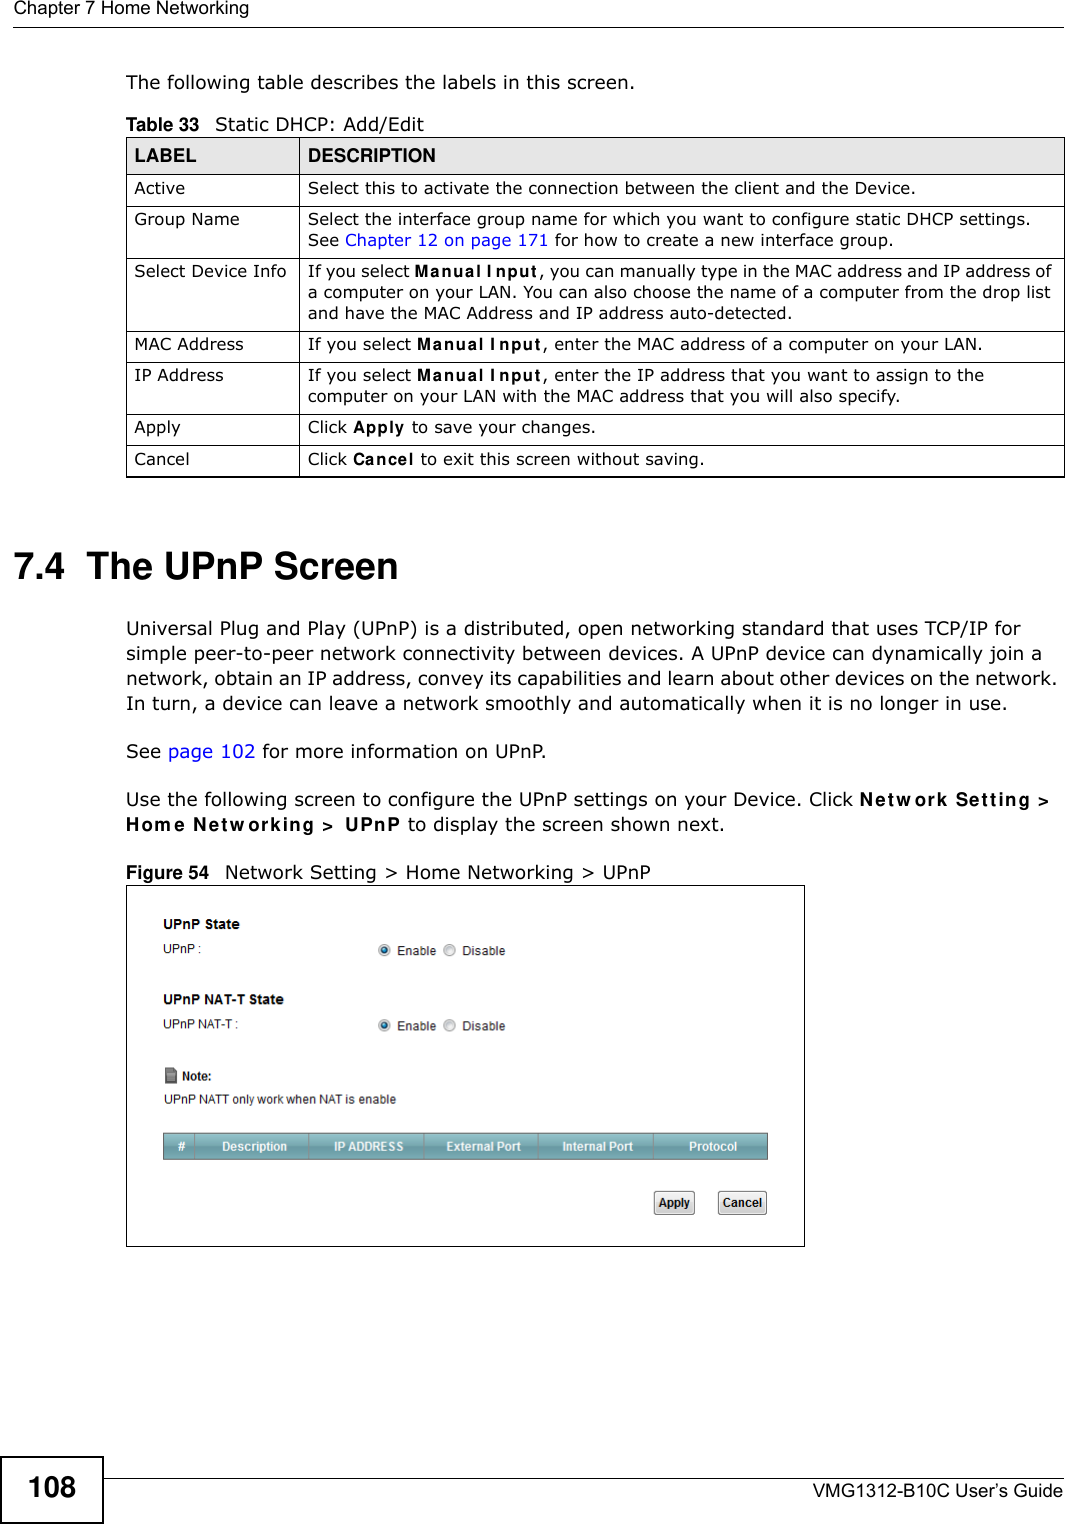 Chapter 7 Home NetworkingVMG1312-B10C User’s Guide108The following table describes the labels in this screen.7.4  The UPnP ScreenUniversal Plug and Play (UPnP) is a distributed, open networking standard that uses TCP/IP for simple peer-to-peer network connectivity between devices. A UPnP device can dynamically join a network, obtain an IP address, convey its capabilities and learn about other devices on the network. In turn, a device can leave a network smoothly and automatically when it is no longer in use.See page 102 for more information on UPnP.Use the following screen to configure the UPnP settings on your Device. Click N et w or k  Set t ing &gt;  Hom e  N e t w ork in g &gt;  UPnP to display the screen shown next.Figure 54   Network Setting &gt; Home Networking &gt; UPnPTable 33   Static DHCP: Add/EditLABEL DESCRIPTIONActive Select this to activate the connection between the client and the Device.Group Name Select the interface group name for which you want to configure static DHCP settings. See Chapter 12 on page 171 for how to create a new interface group.Select Device Info If you select Ma nual I n put , you can manually type in the MAC address and IP address of a computer on your LAN. You can also choose the name of a computer from the drop list and have the MAC Address and IP address auto-detected.MAC Address If you select M anu a l I npu t , enter the MAC address of a computer on your LAN.IP Address If you select Manual I n put , enter the IP address that you want to assign to the computer on your LAN with the MAC address that you will also specify.Apply Click Apply to save your changes.Cancel Click Cance l to exit this screen without saving.